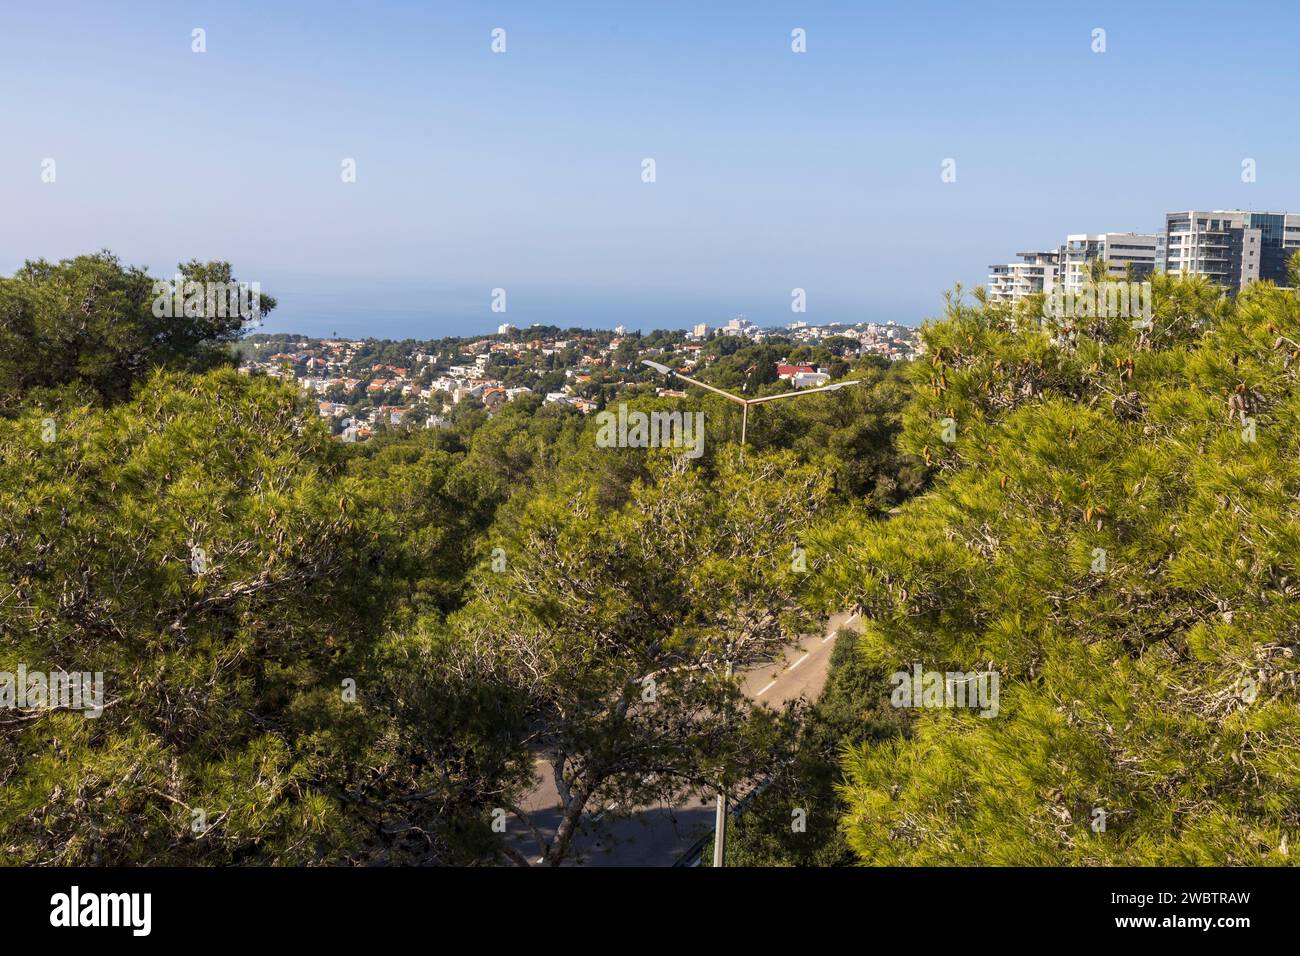 View of the Nesher Nature Reserve from the pedestrian bridge in good weather Stock Photo